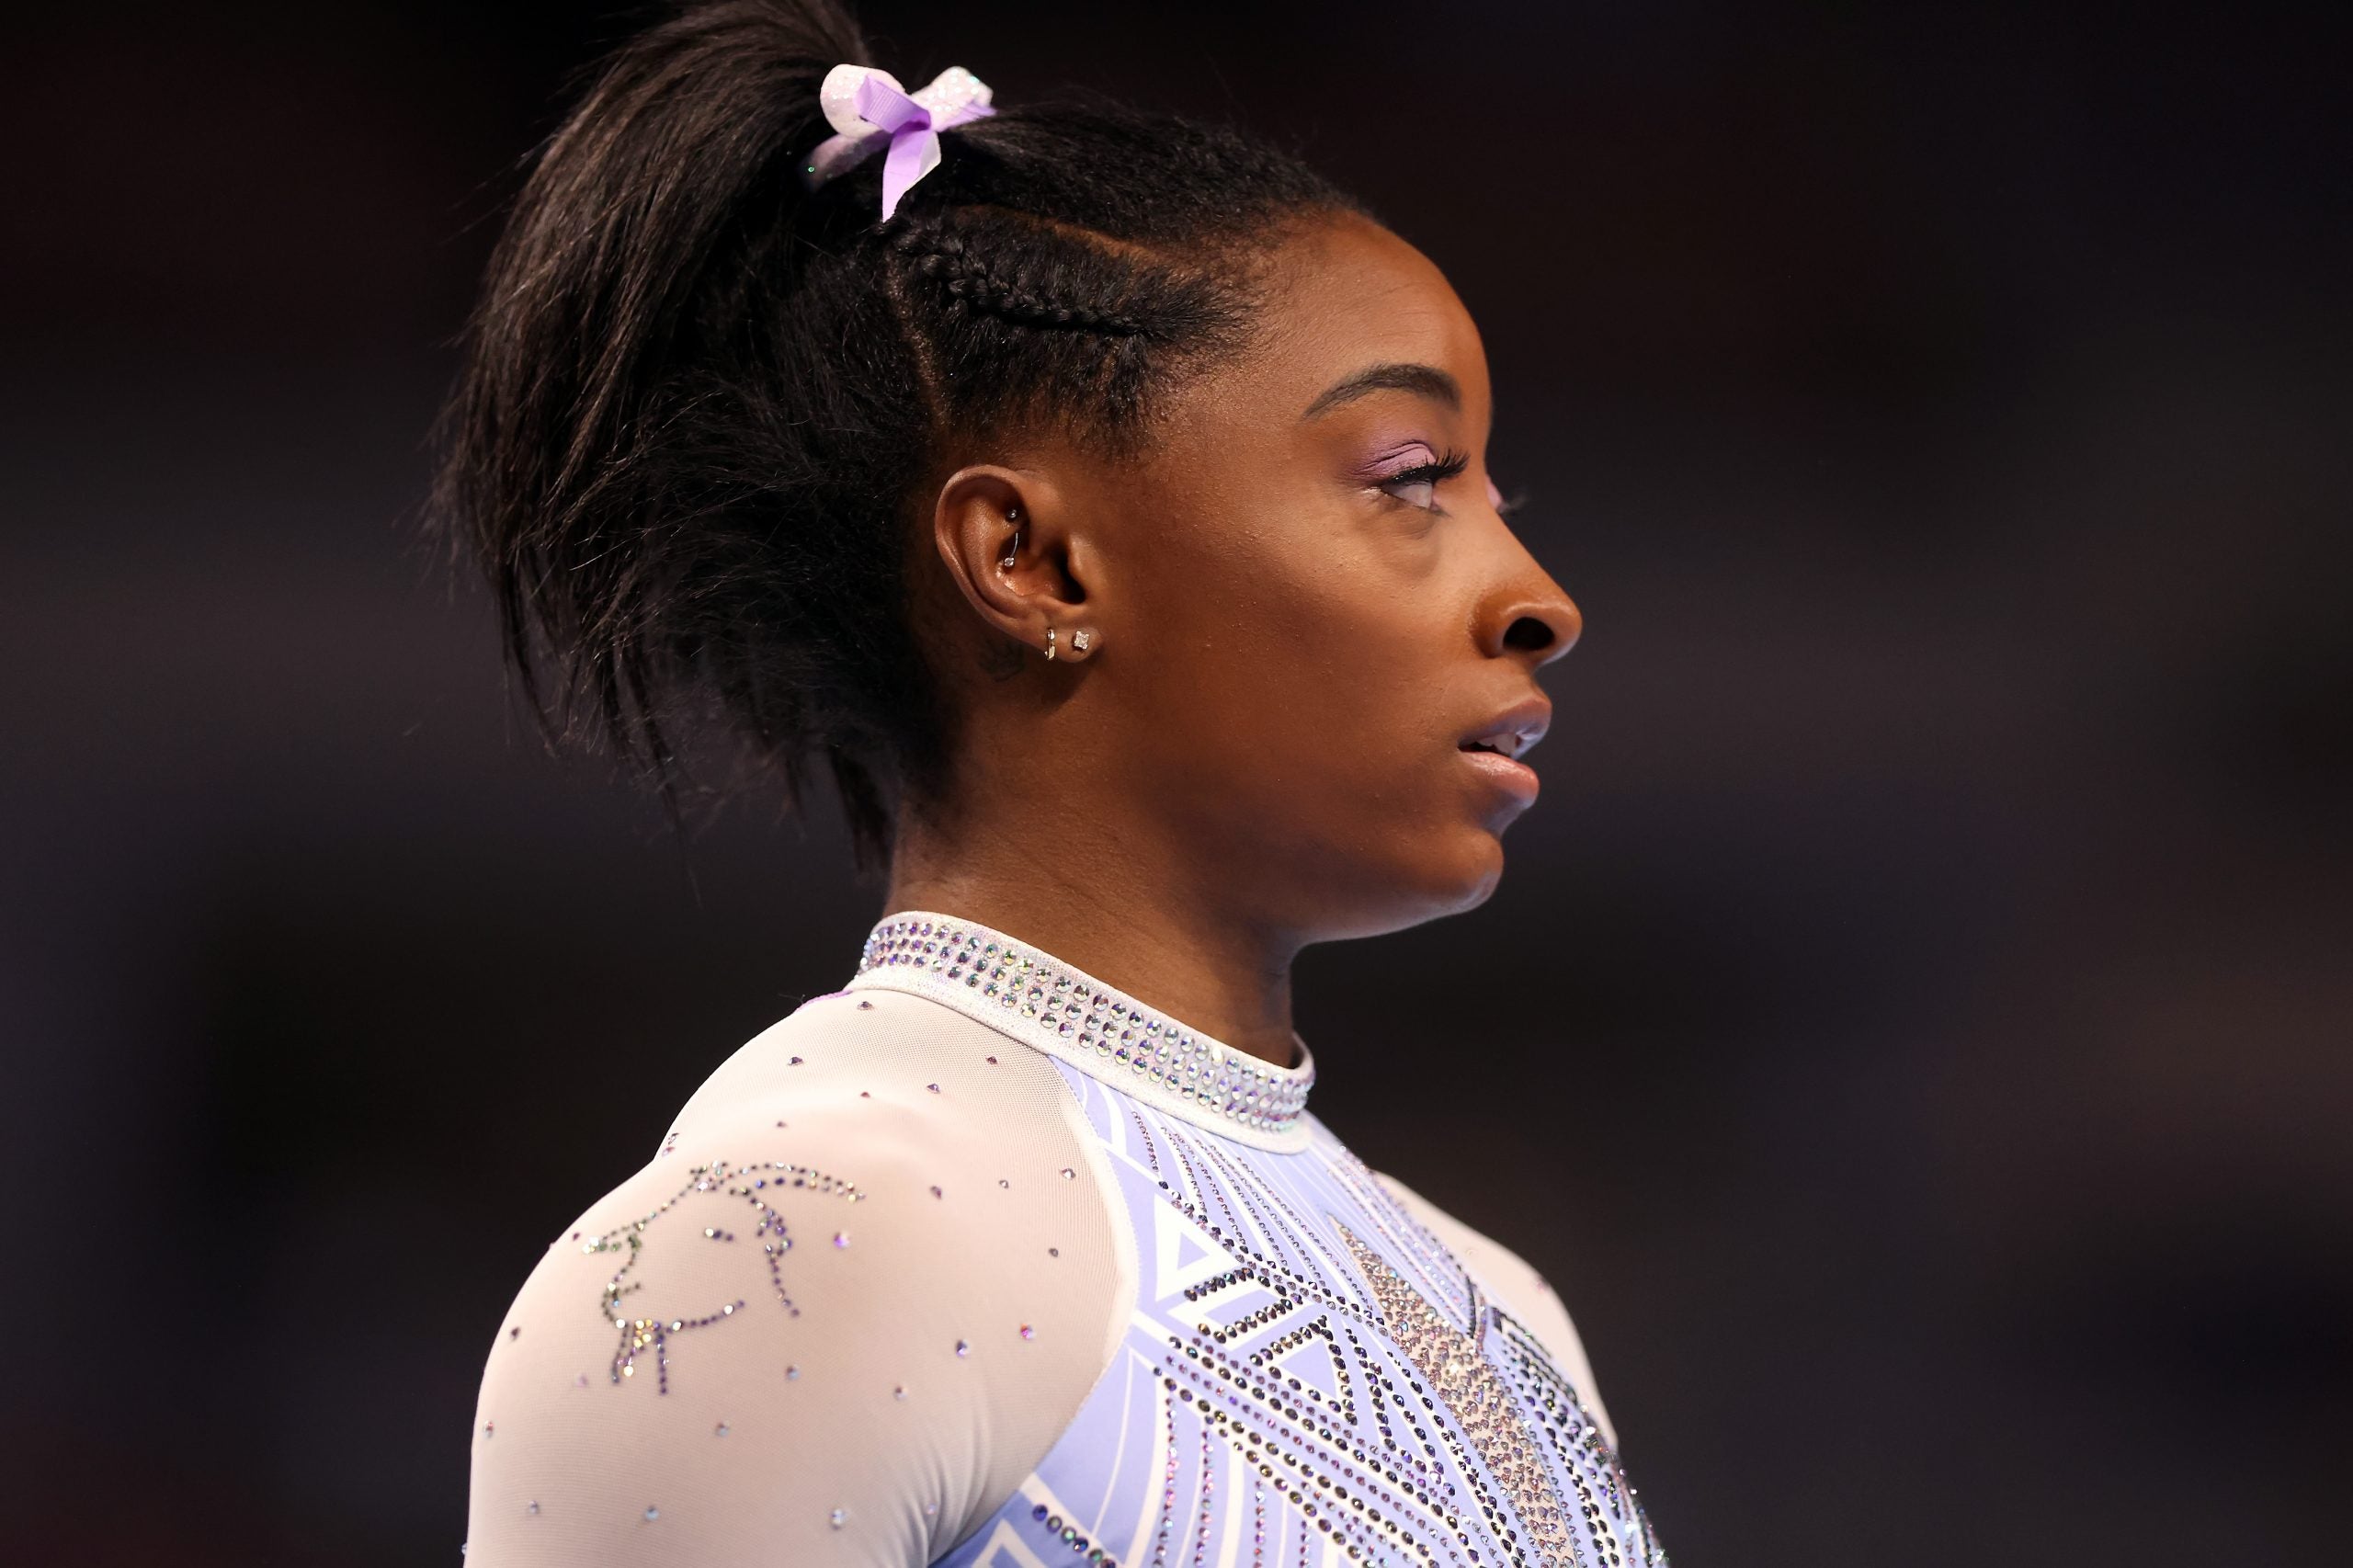 Twitter is Honoring Simone Biles With Her Own "GOAT" Emoji